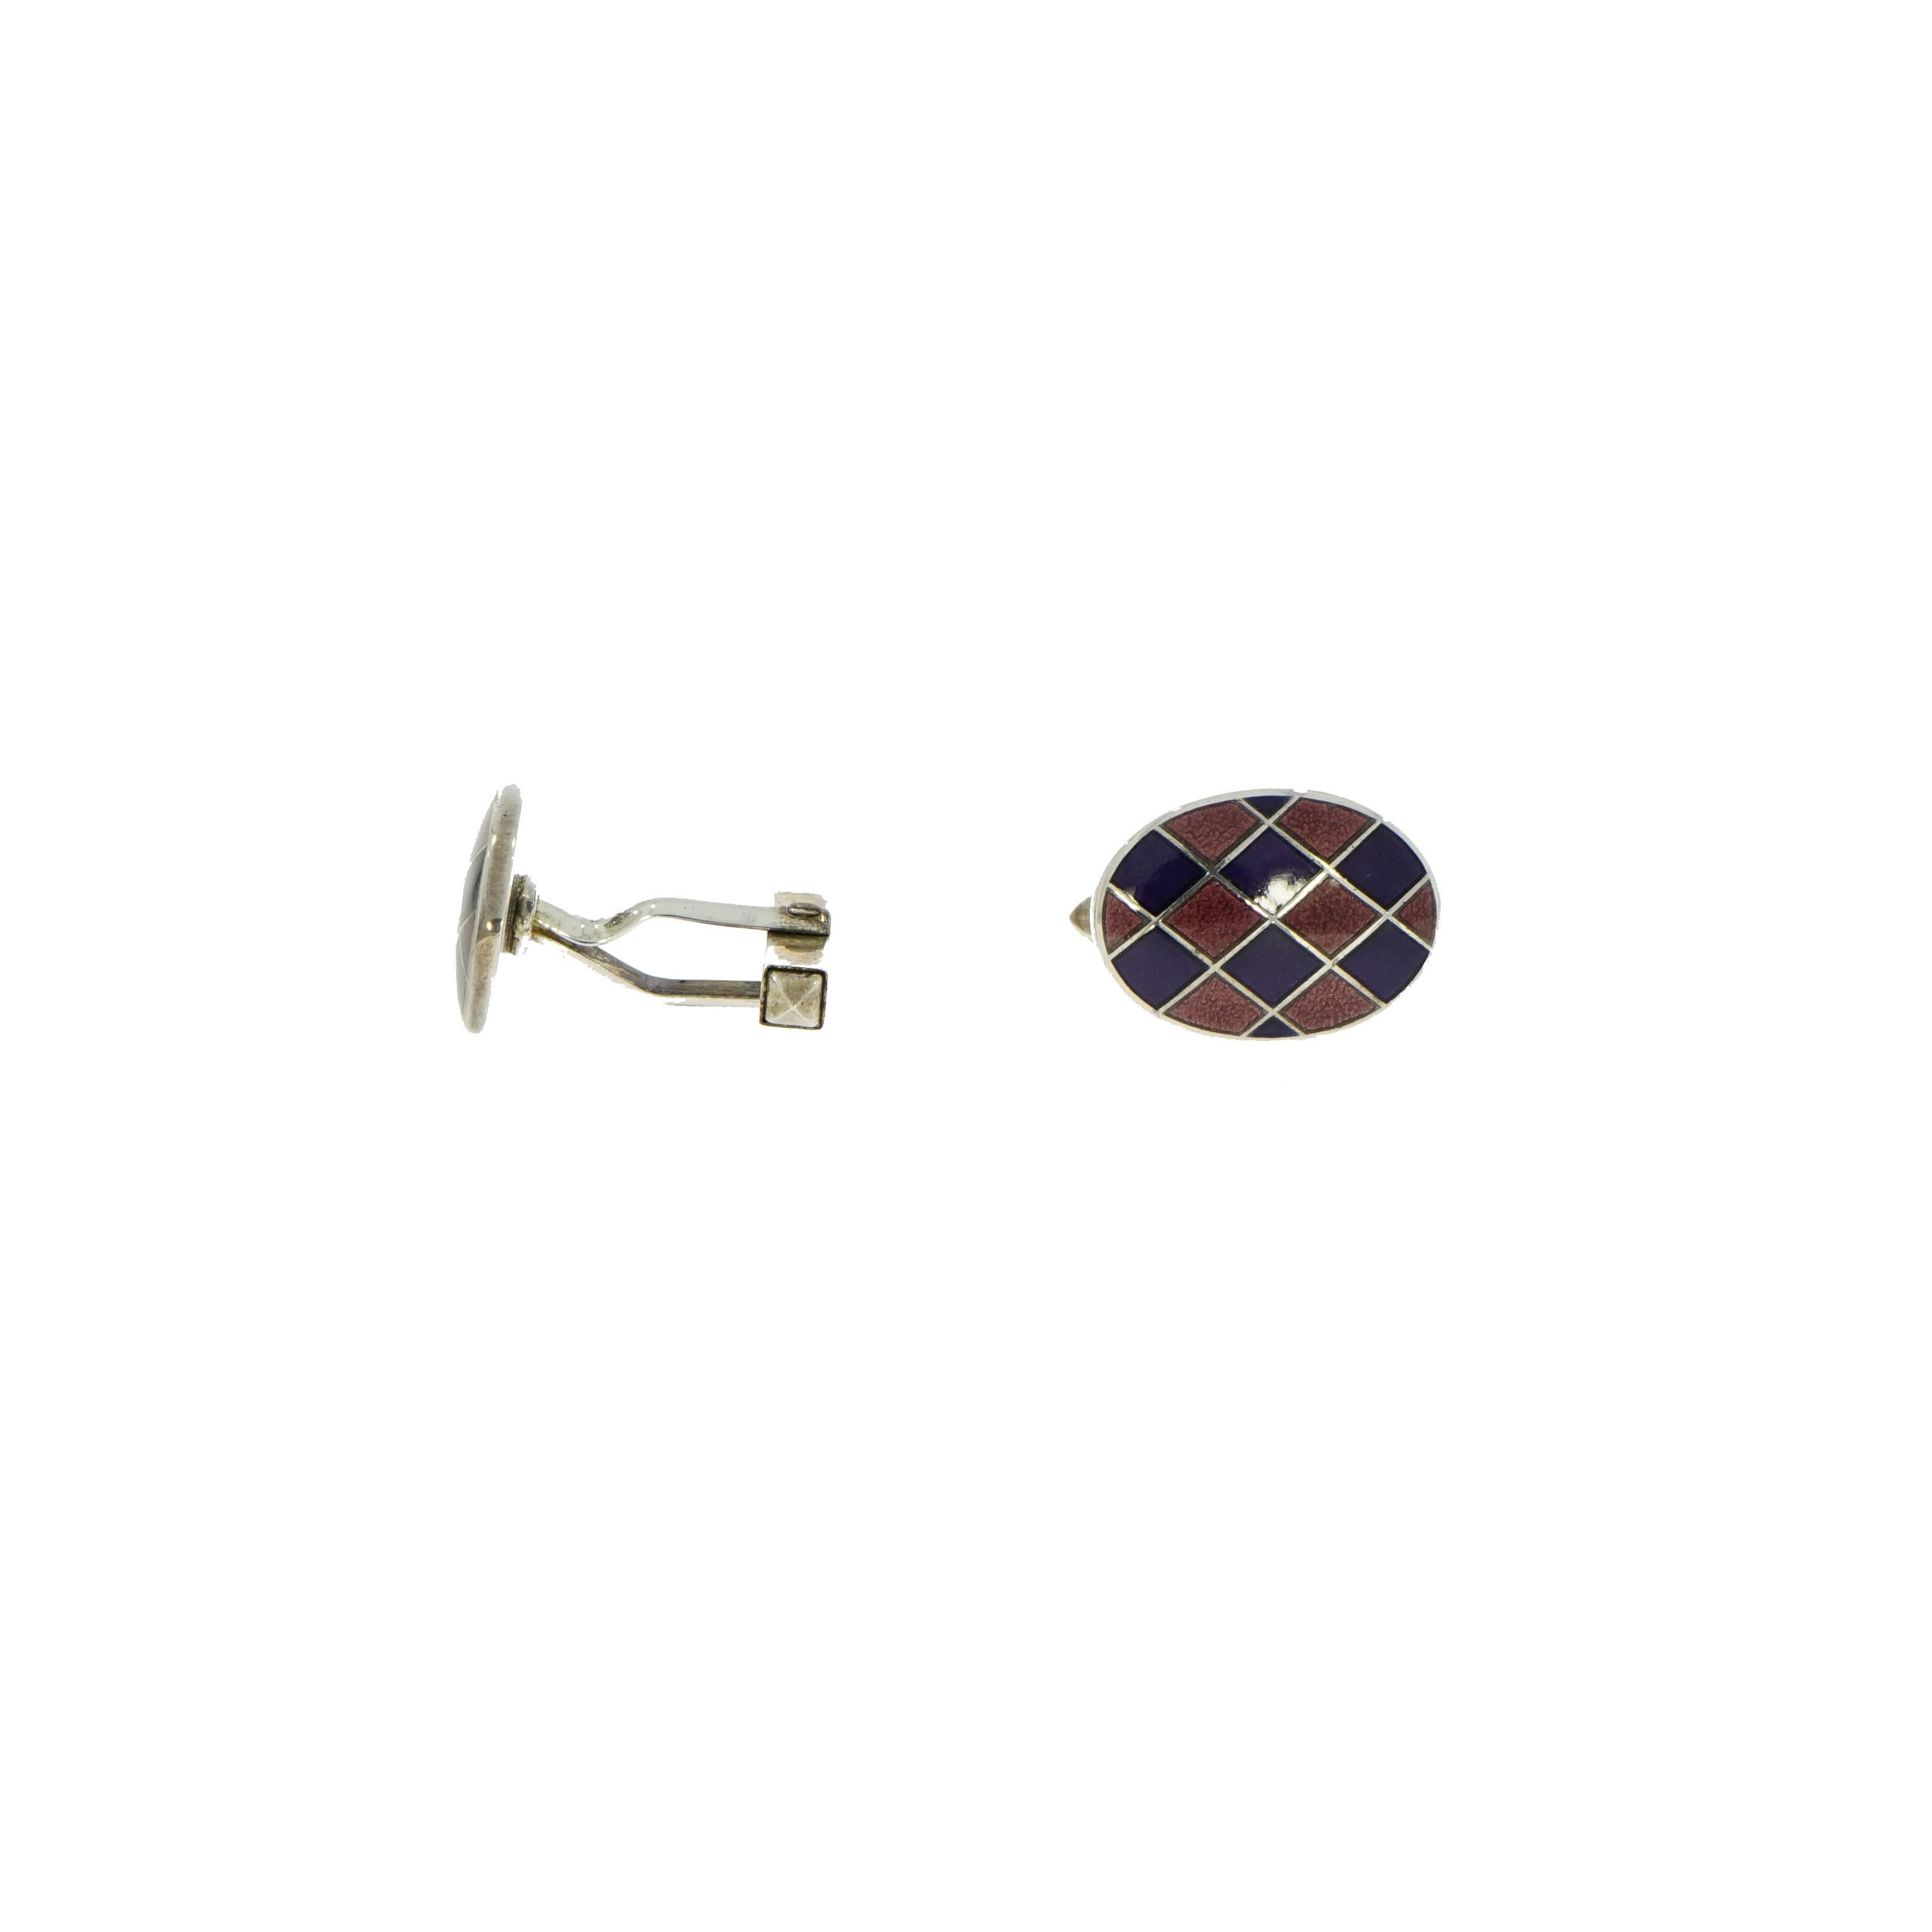 Worn with a white shirt, vintage tie and jeans or a classic suit this pair of cufflinks will certainly make an individual style statement. This sterling silver harlequin enameled oval cufflinks is handcrafted in England and measures 14mm x 19mm.